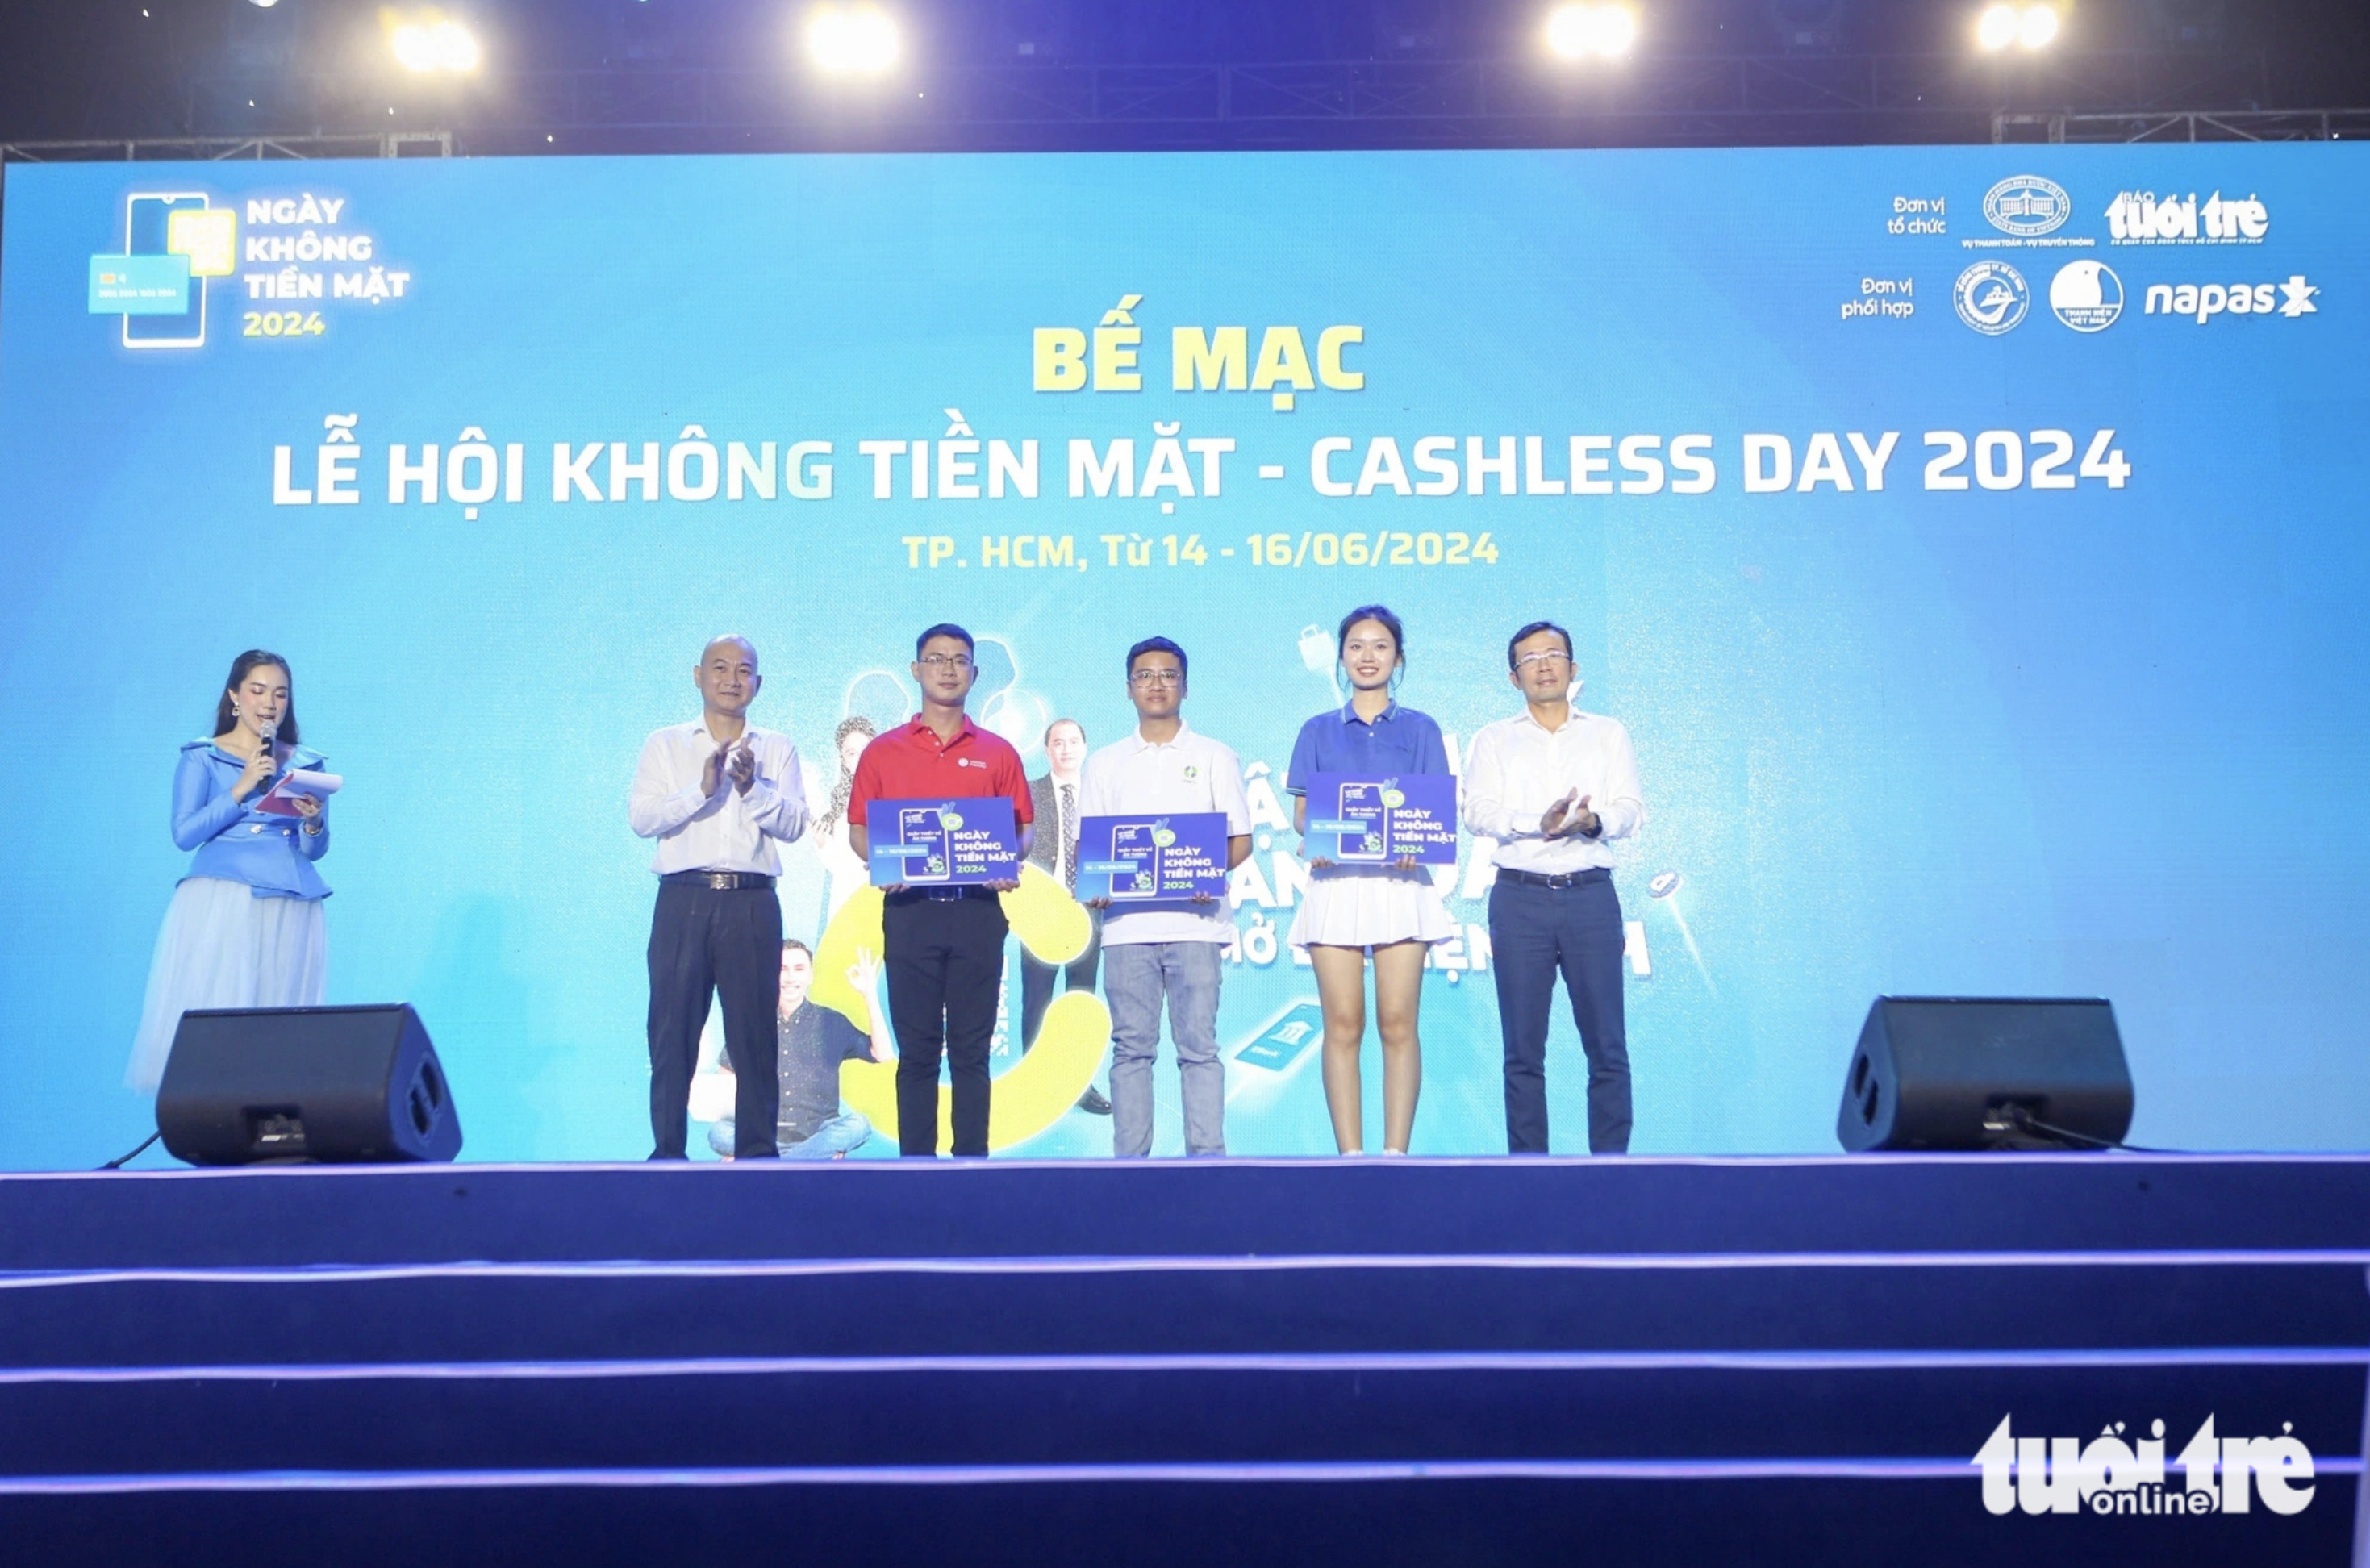 ONEFIN, NAPAS and Vietel Money secure prizes for ‘Booths with impressive designs.’ Photo: Phuong Quyen / Tuoi Tre